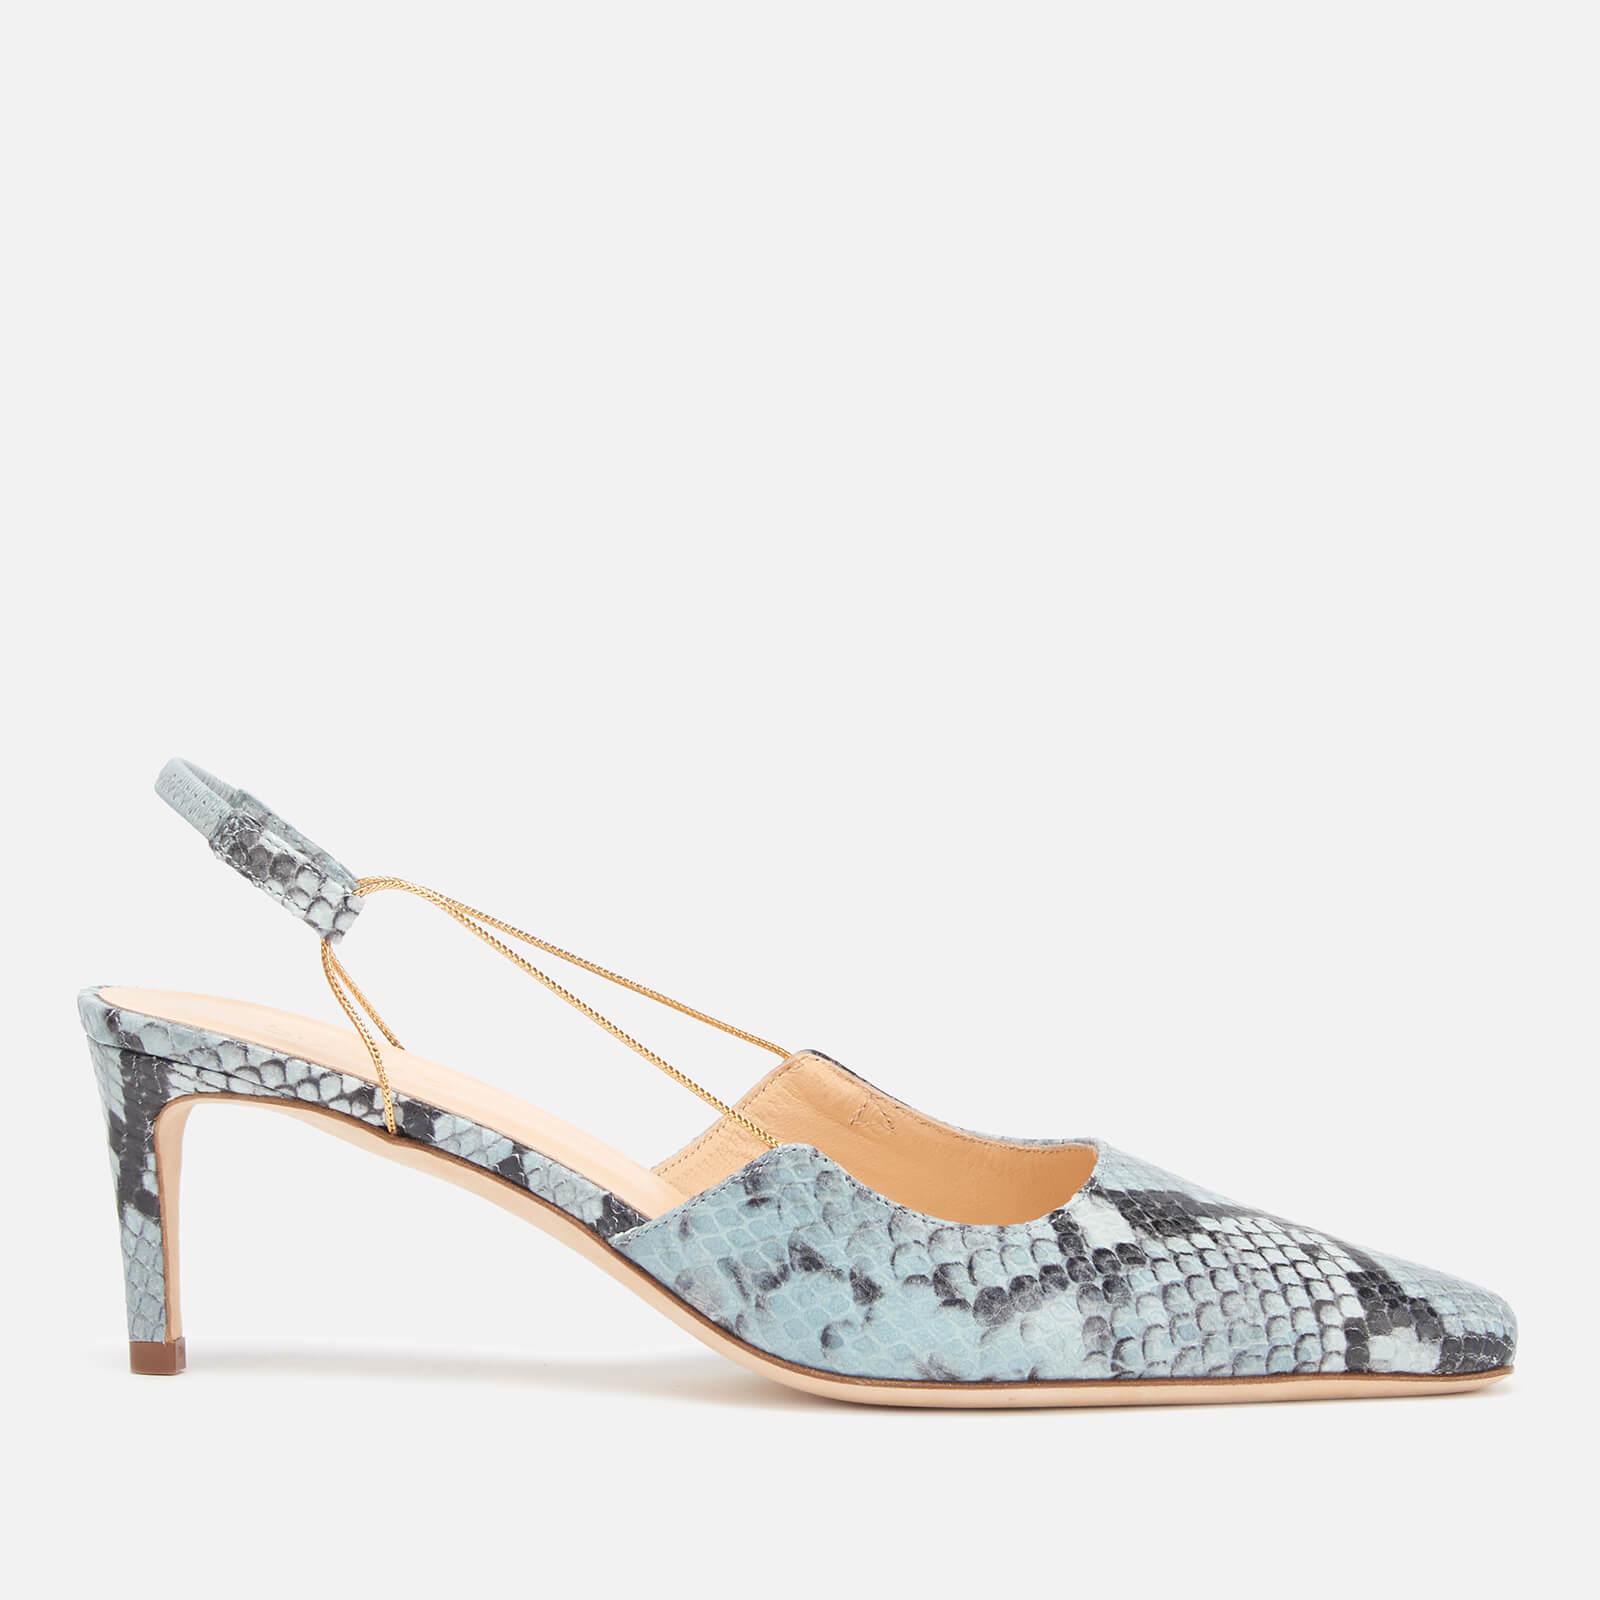 BY FAR Gabriella Snake Print Leather Sling Back Court Shoes in Grey ...